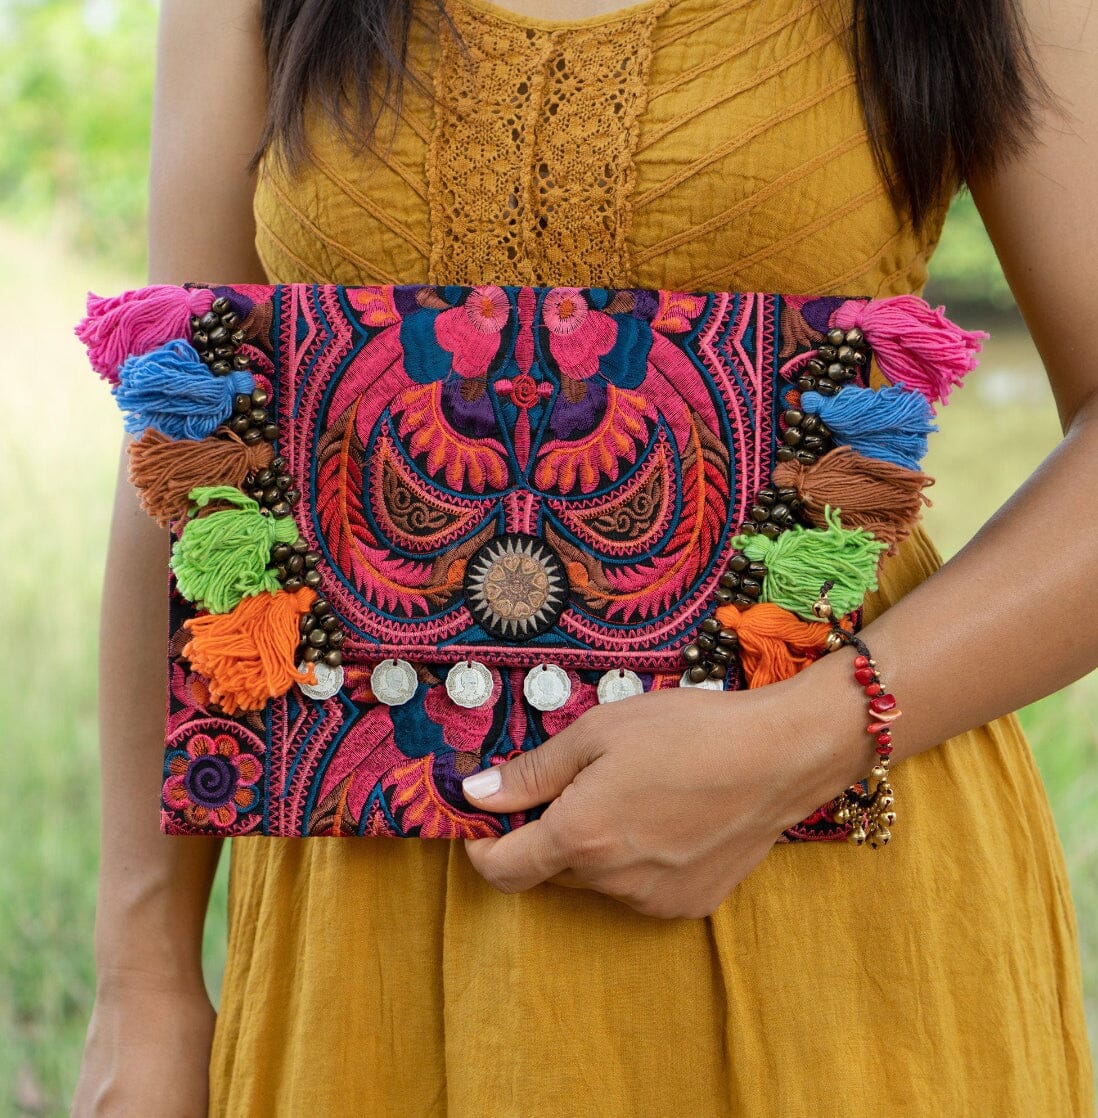 Colorful Embroidered Clutch - Tassel Clutch Bag - Bohemian Style Embroidered Clutch Bag 